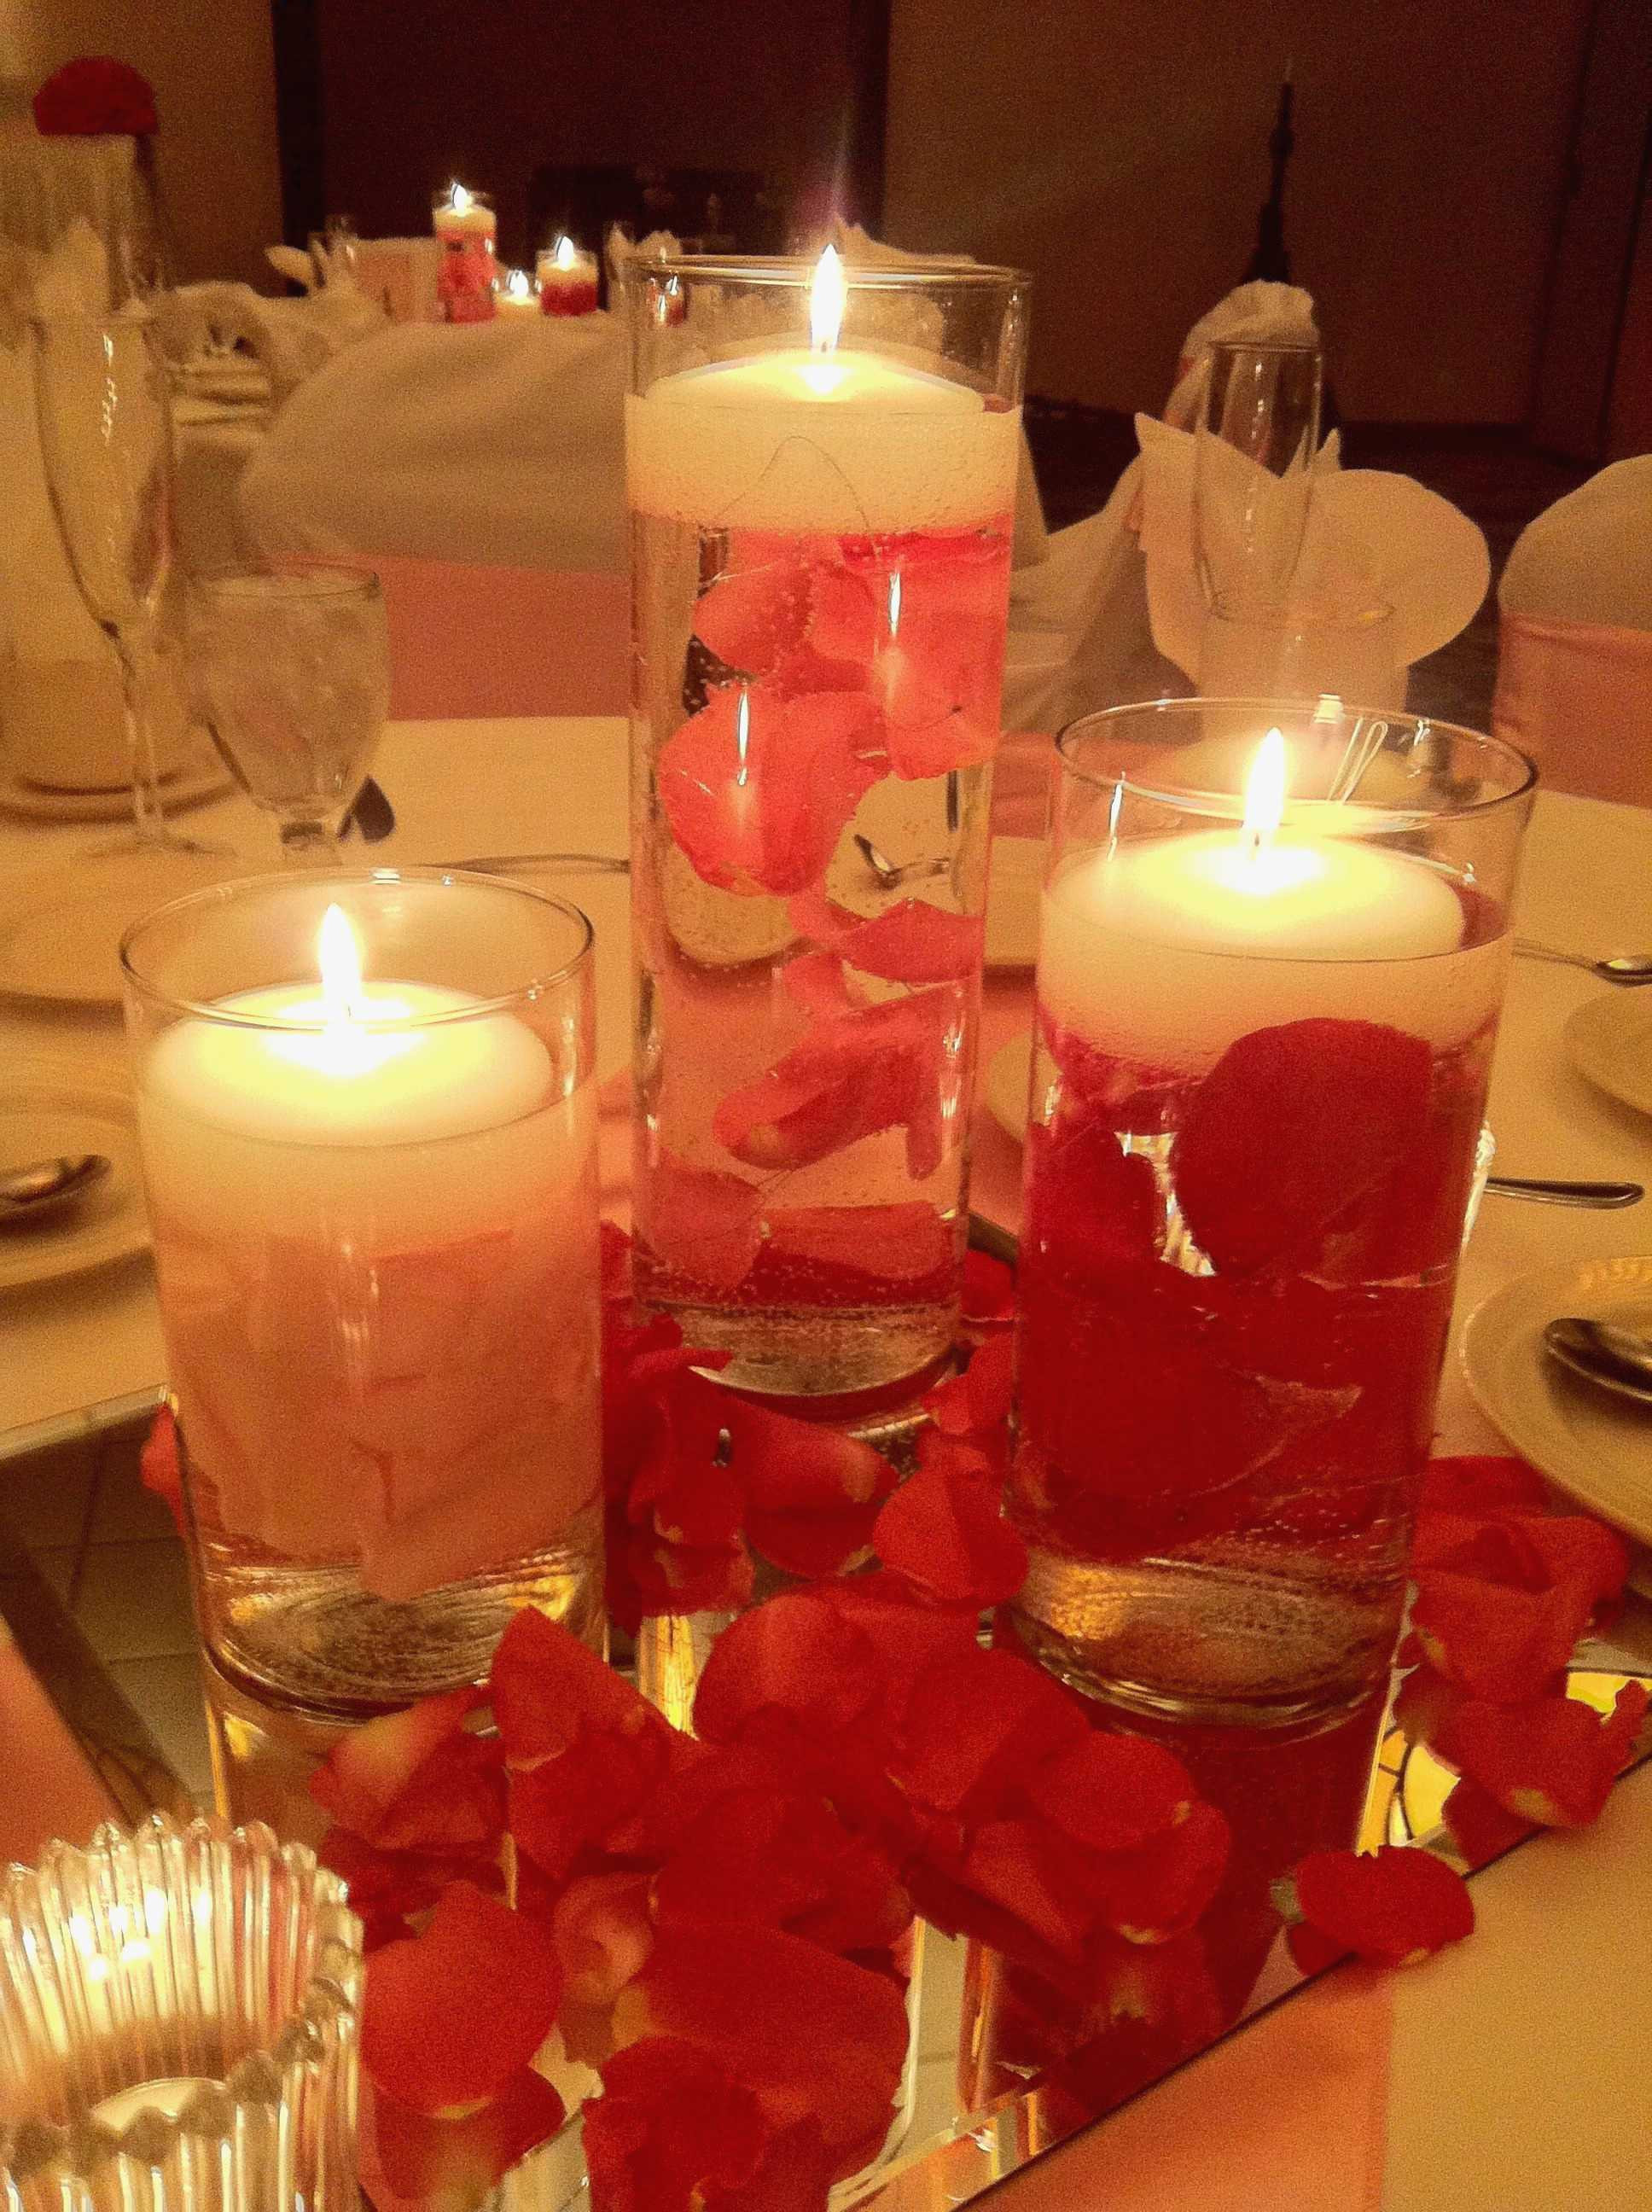 24 Amazing Tall Glass Vase Centerpiece Ideas 2023 free download tall glass vase centerpiece ideas of wedding favor gifts lovely vases vase centerpieces ideas clear with regard to wedding favor gifts new wedding wedding party favors ideas beautiful furnit